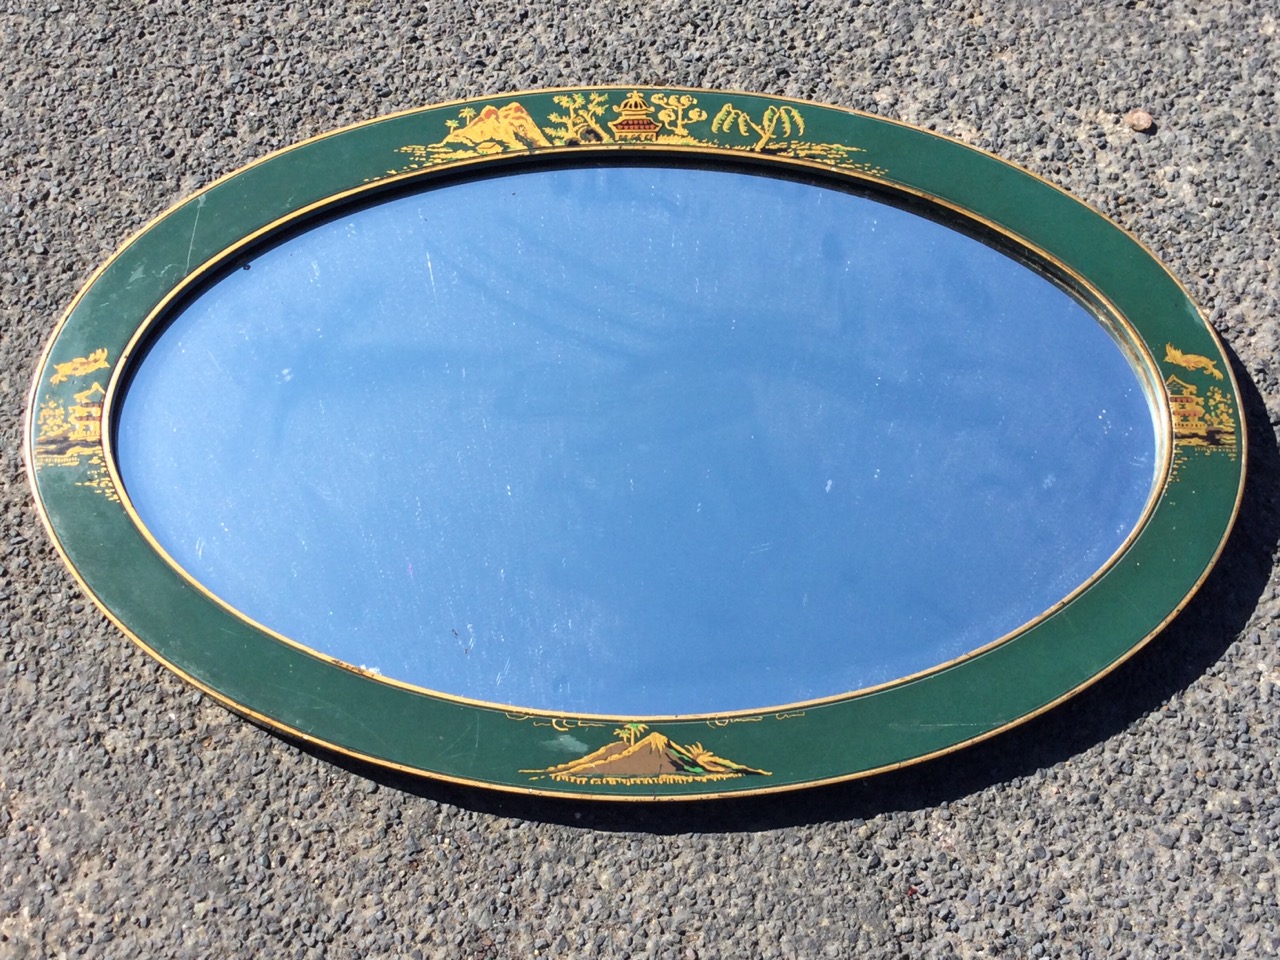 An oval lacquer framed mirror, the bevelled plate in green border framed by gilt bands, decorated